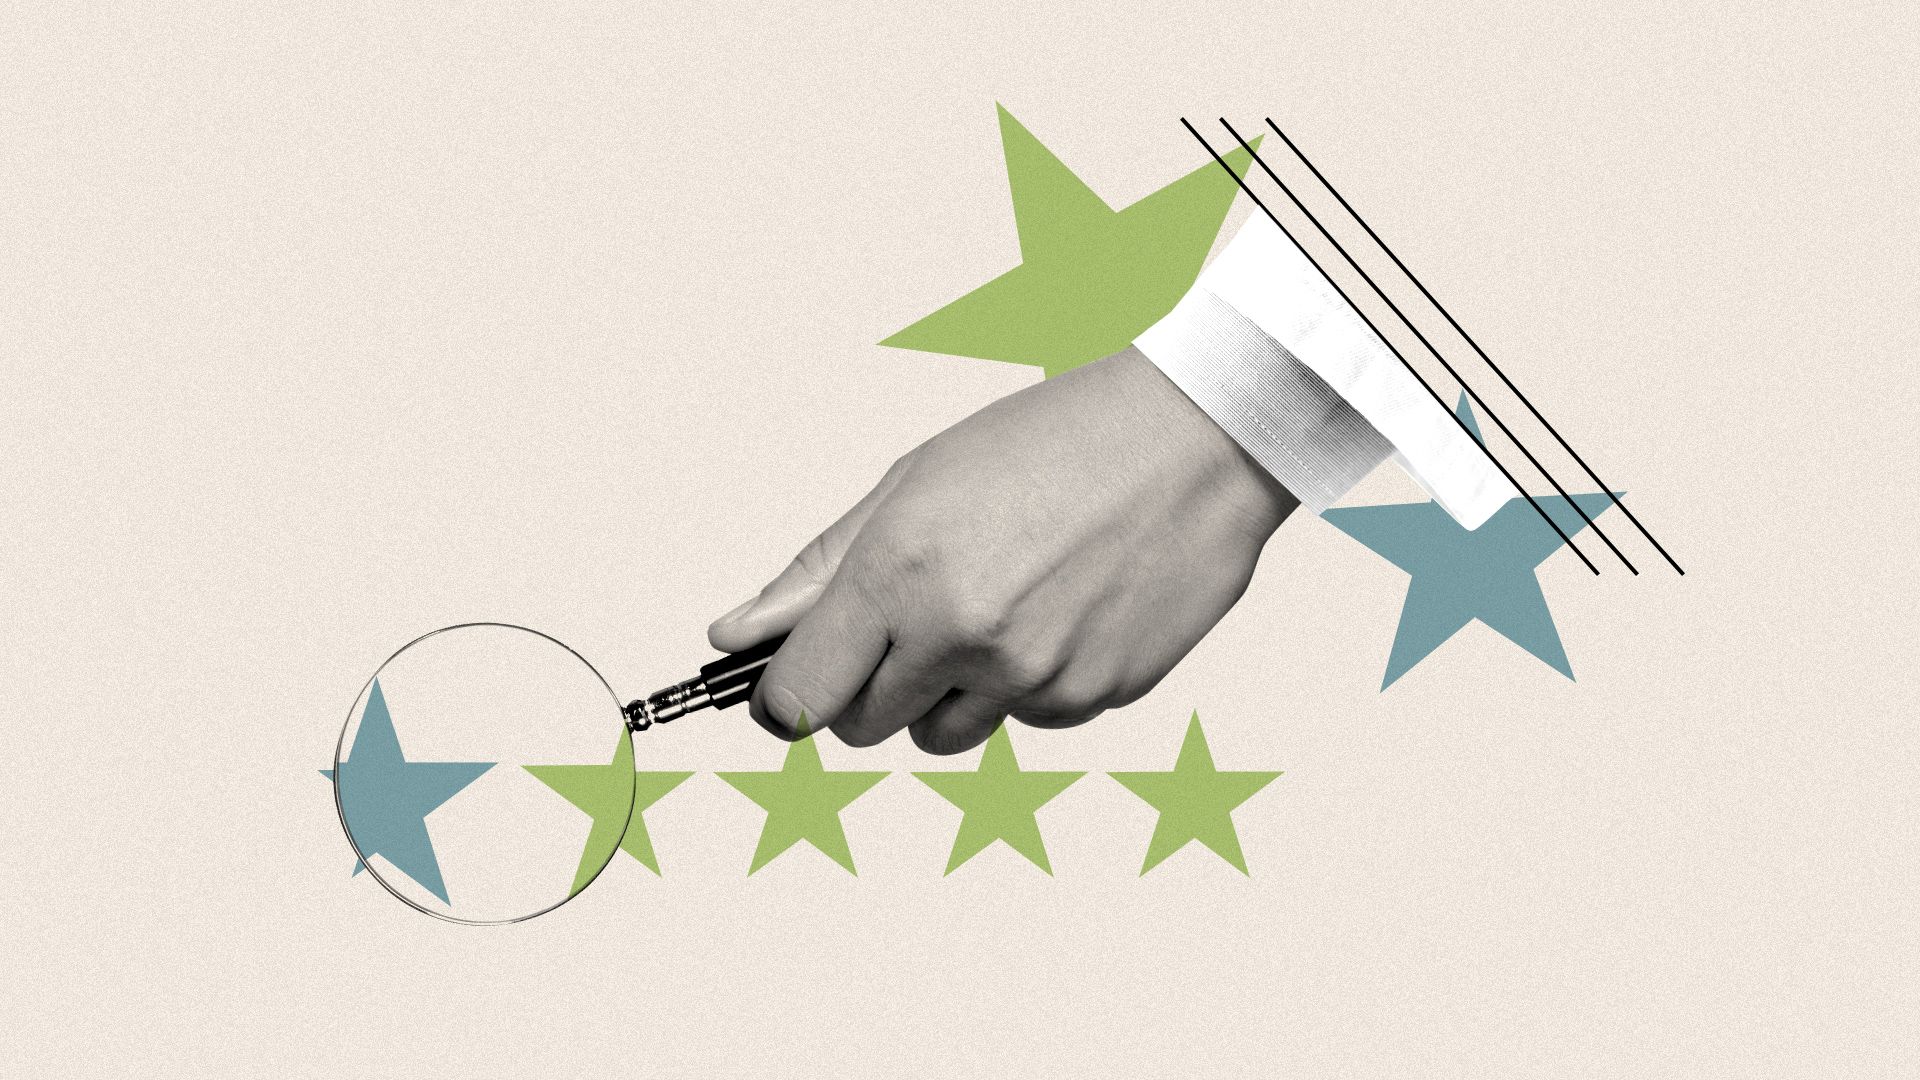 Illustrated collage of a doctor's hand holding a magnifying glass examining a rating star system.